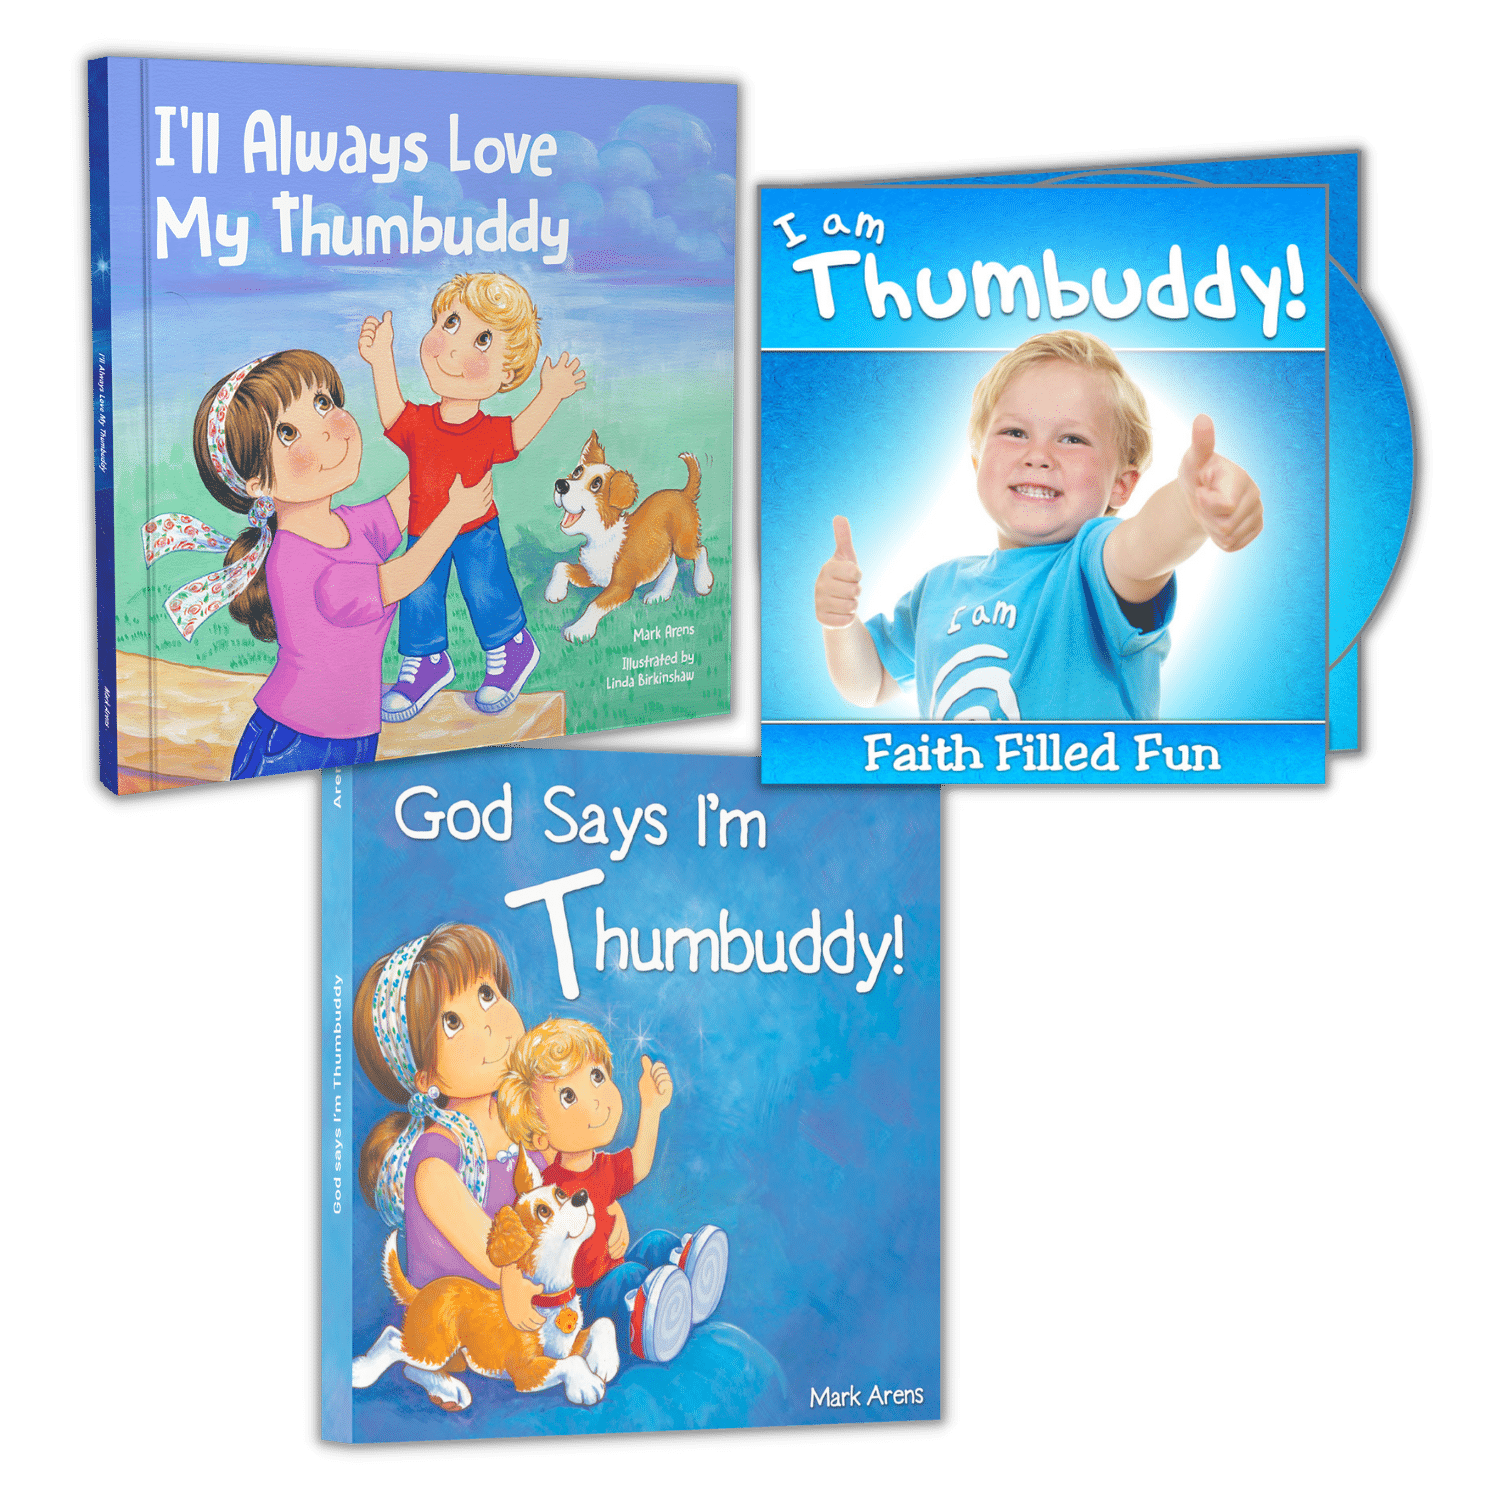 Thumbuddy Christian books from christian bookstore Little Big Things